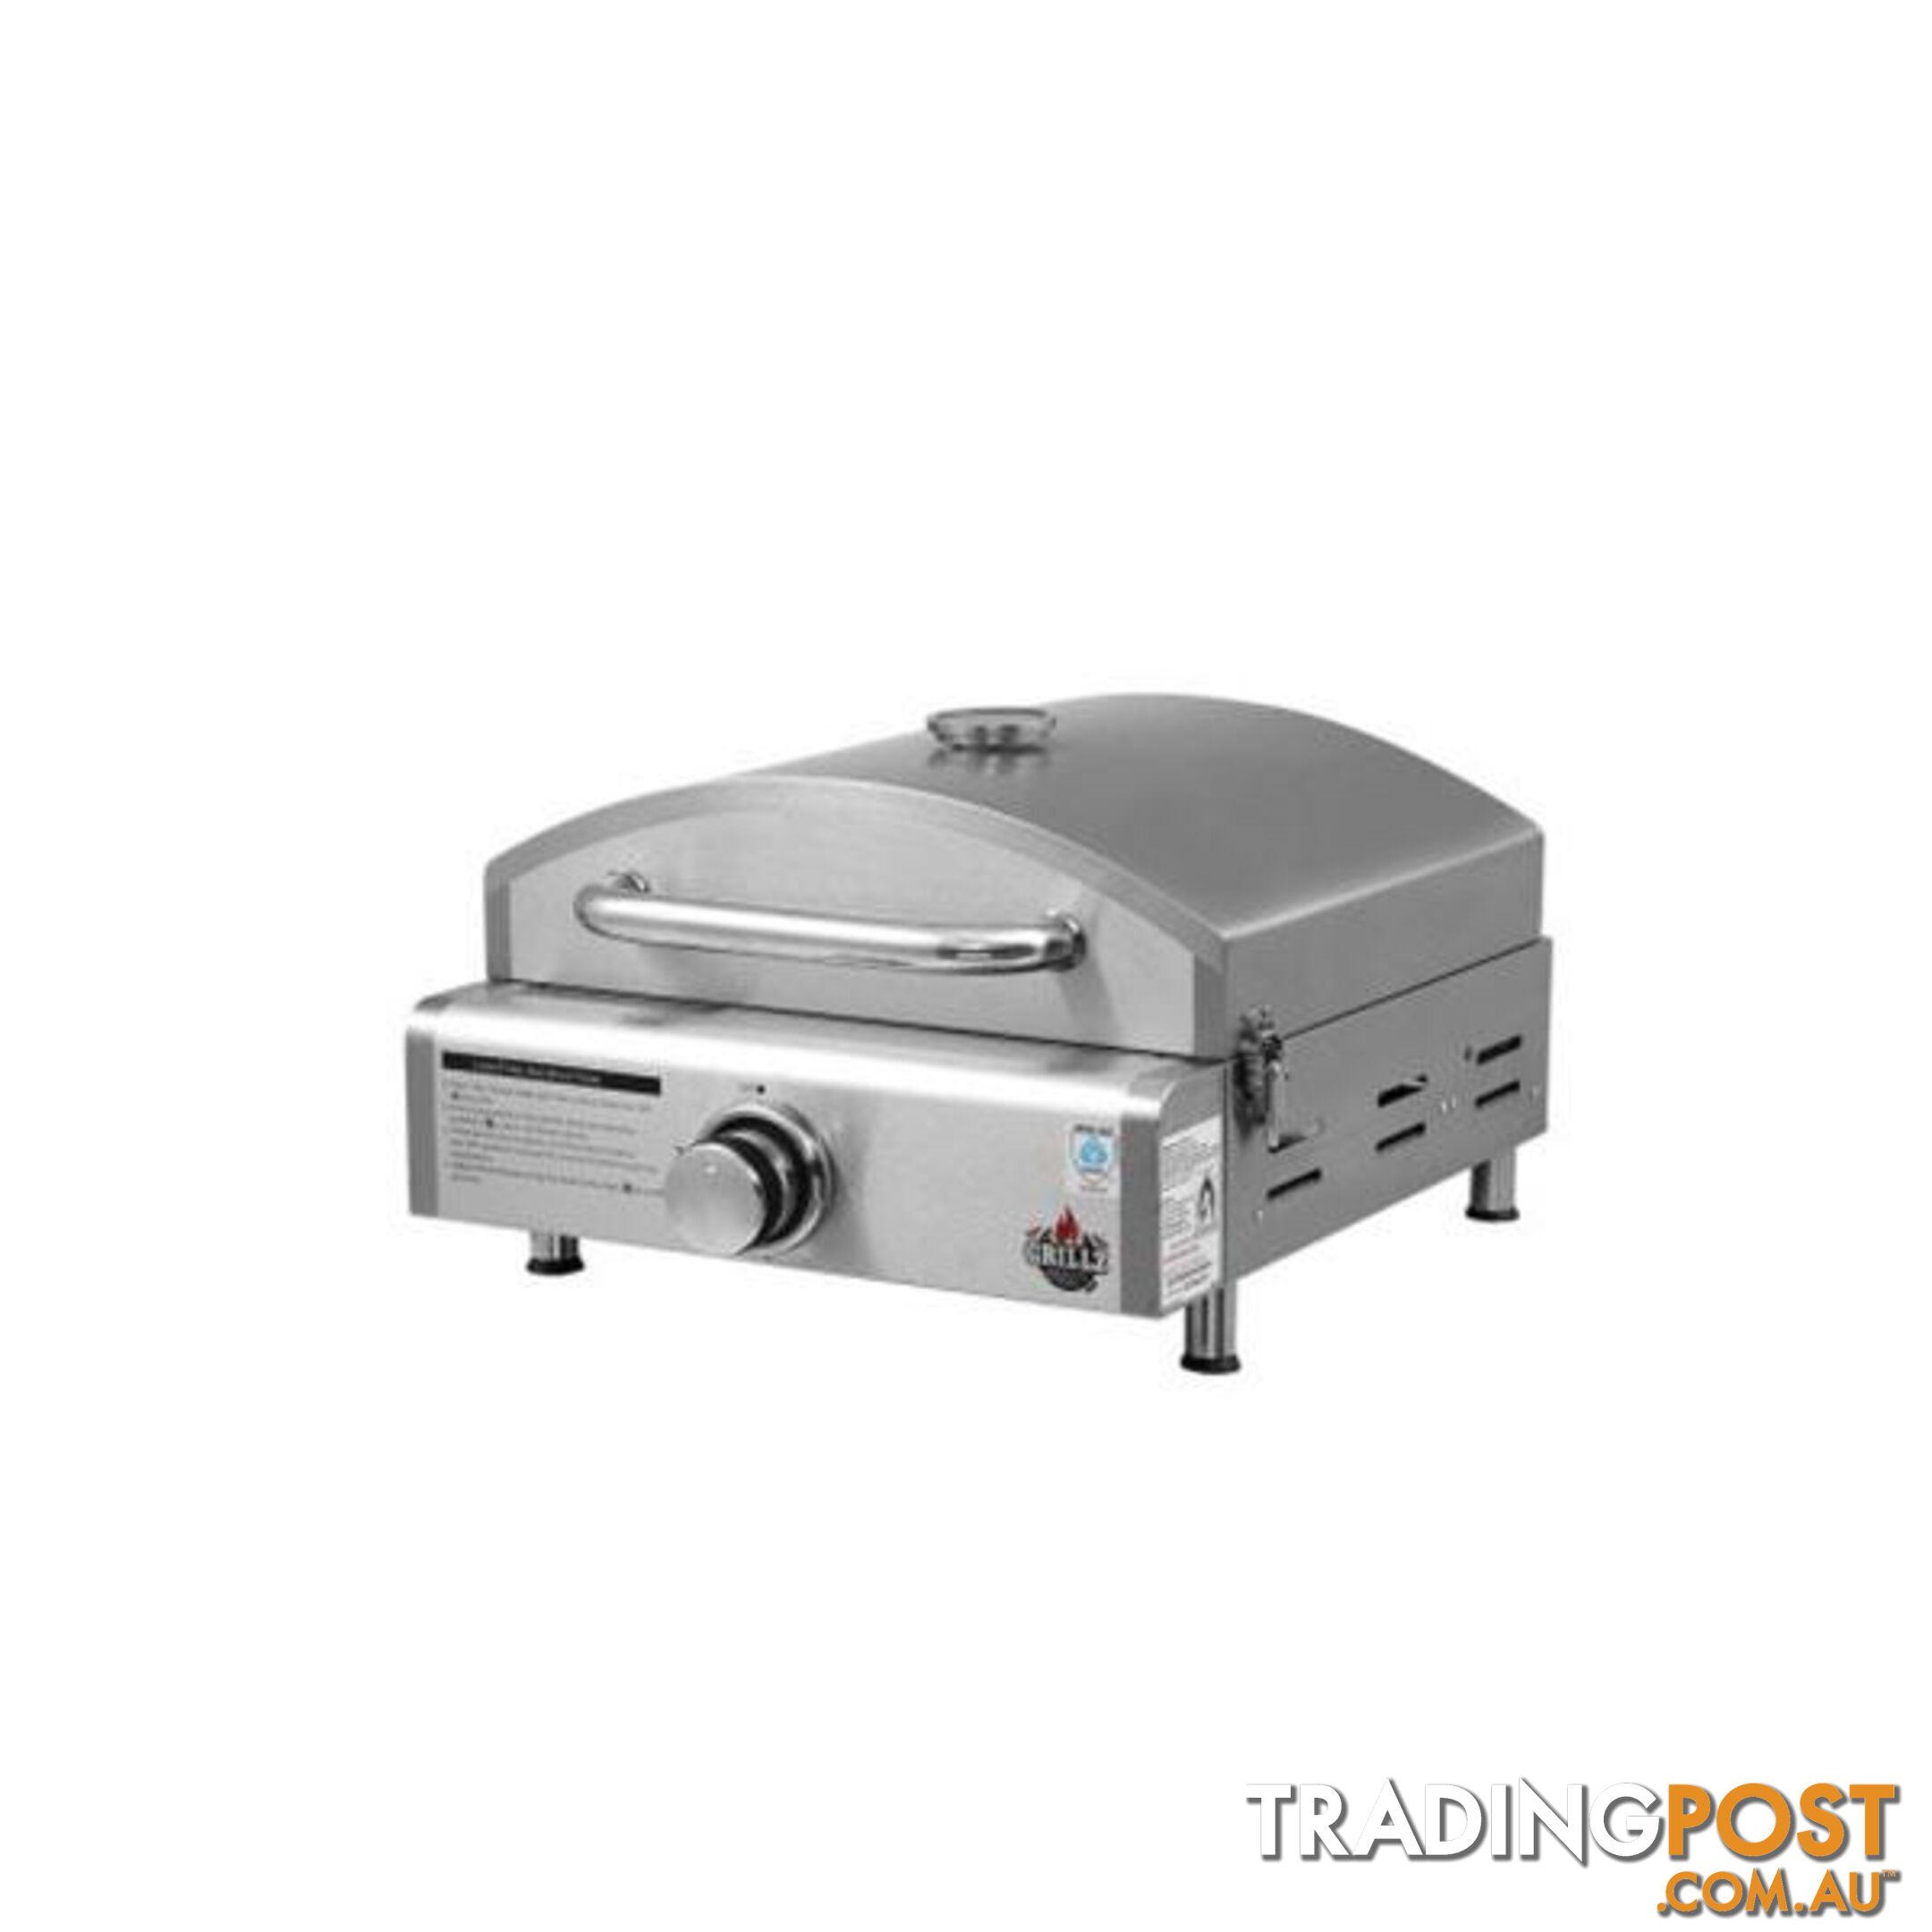 Portable Gas Oven Camping Cooking Lpg Grill Pizza Stainless Steel - Grillz - 7427046184052